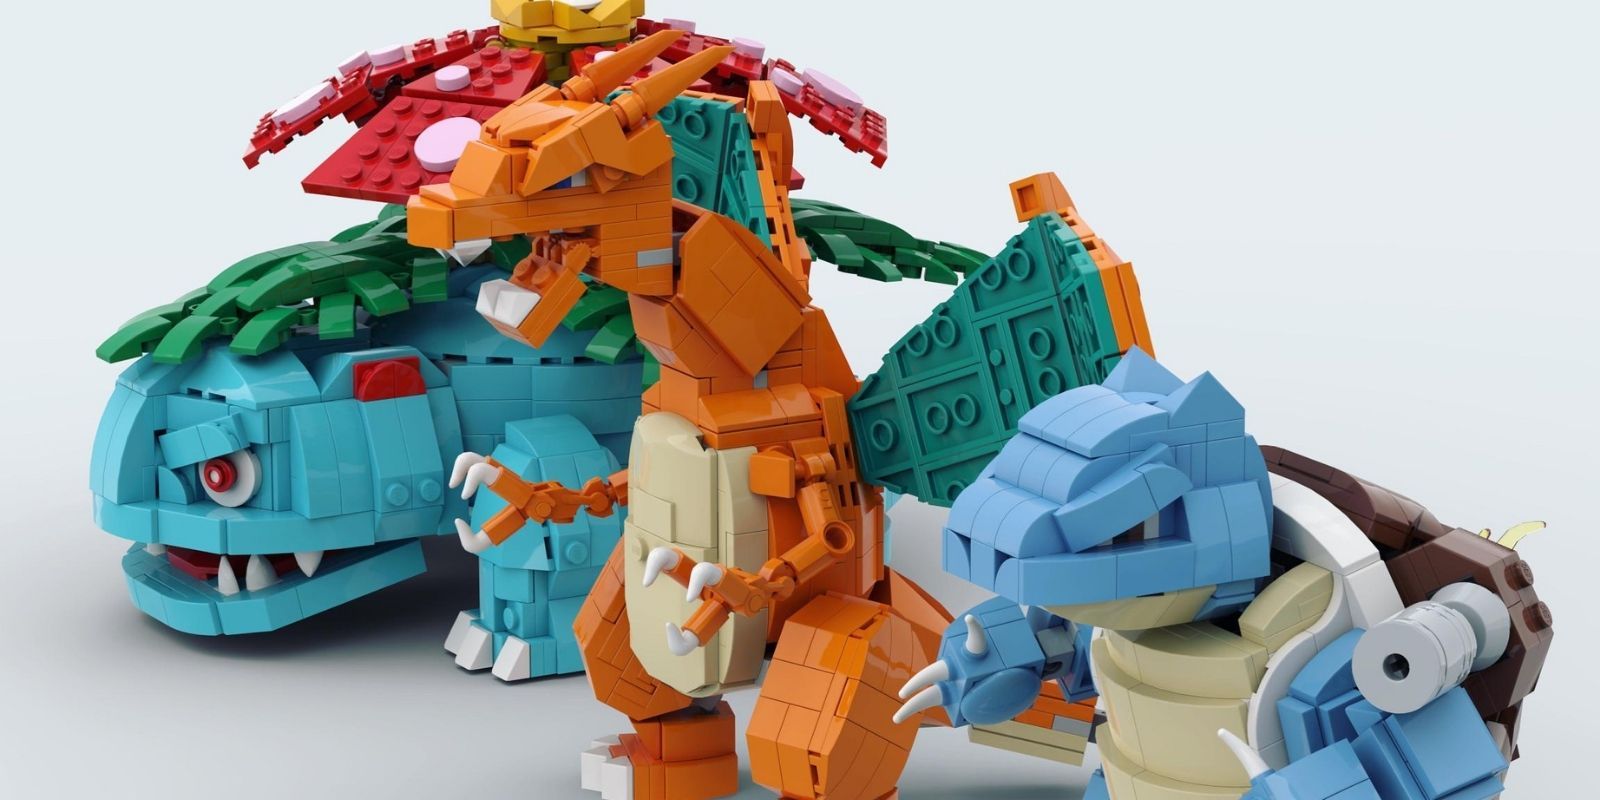 Pokémon Fan Perfectly Creates Three Iconic Pocket Monsters in LEGO